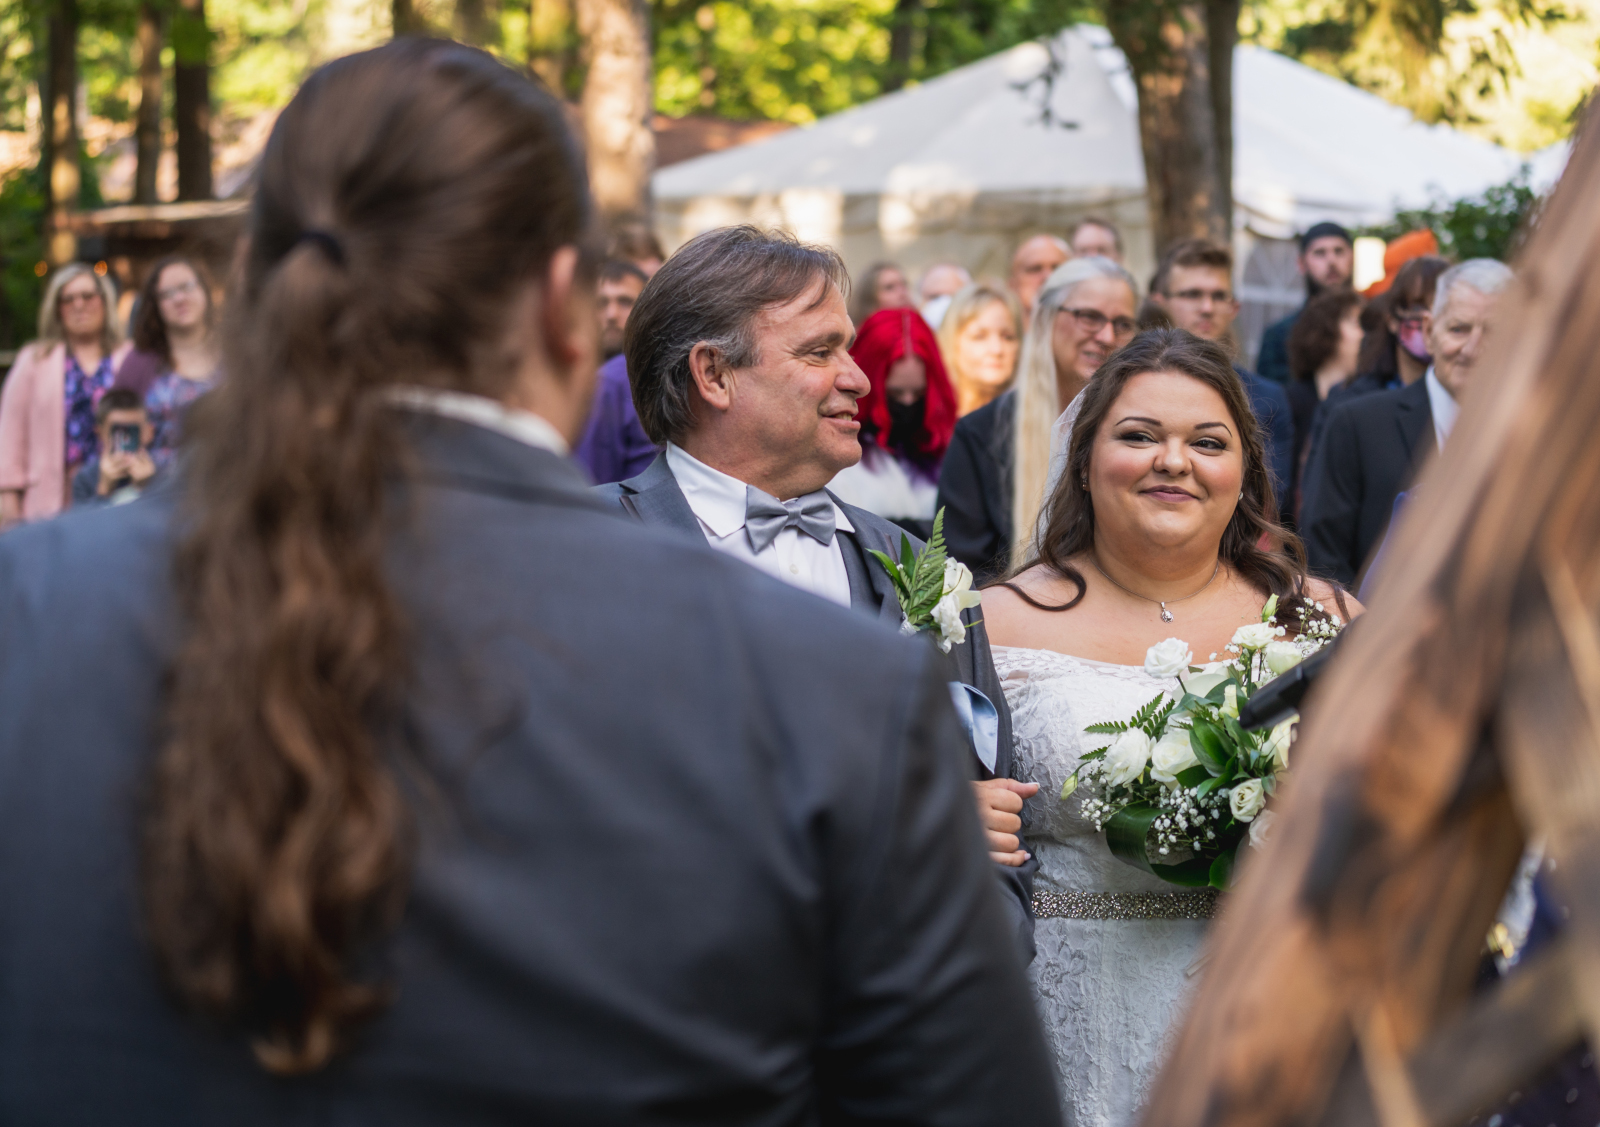 Bride with dad, father of the bride, bridal march, bridal processional, bride looking at groom, smile, outdoor September wedding ceremony at Westfall Event Center